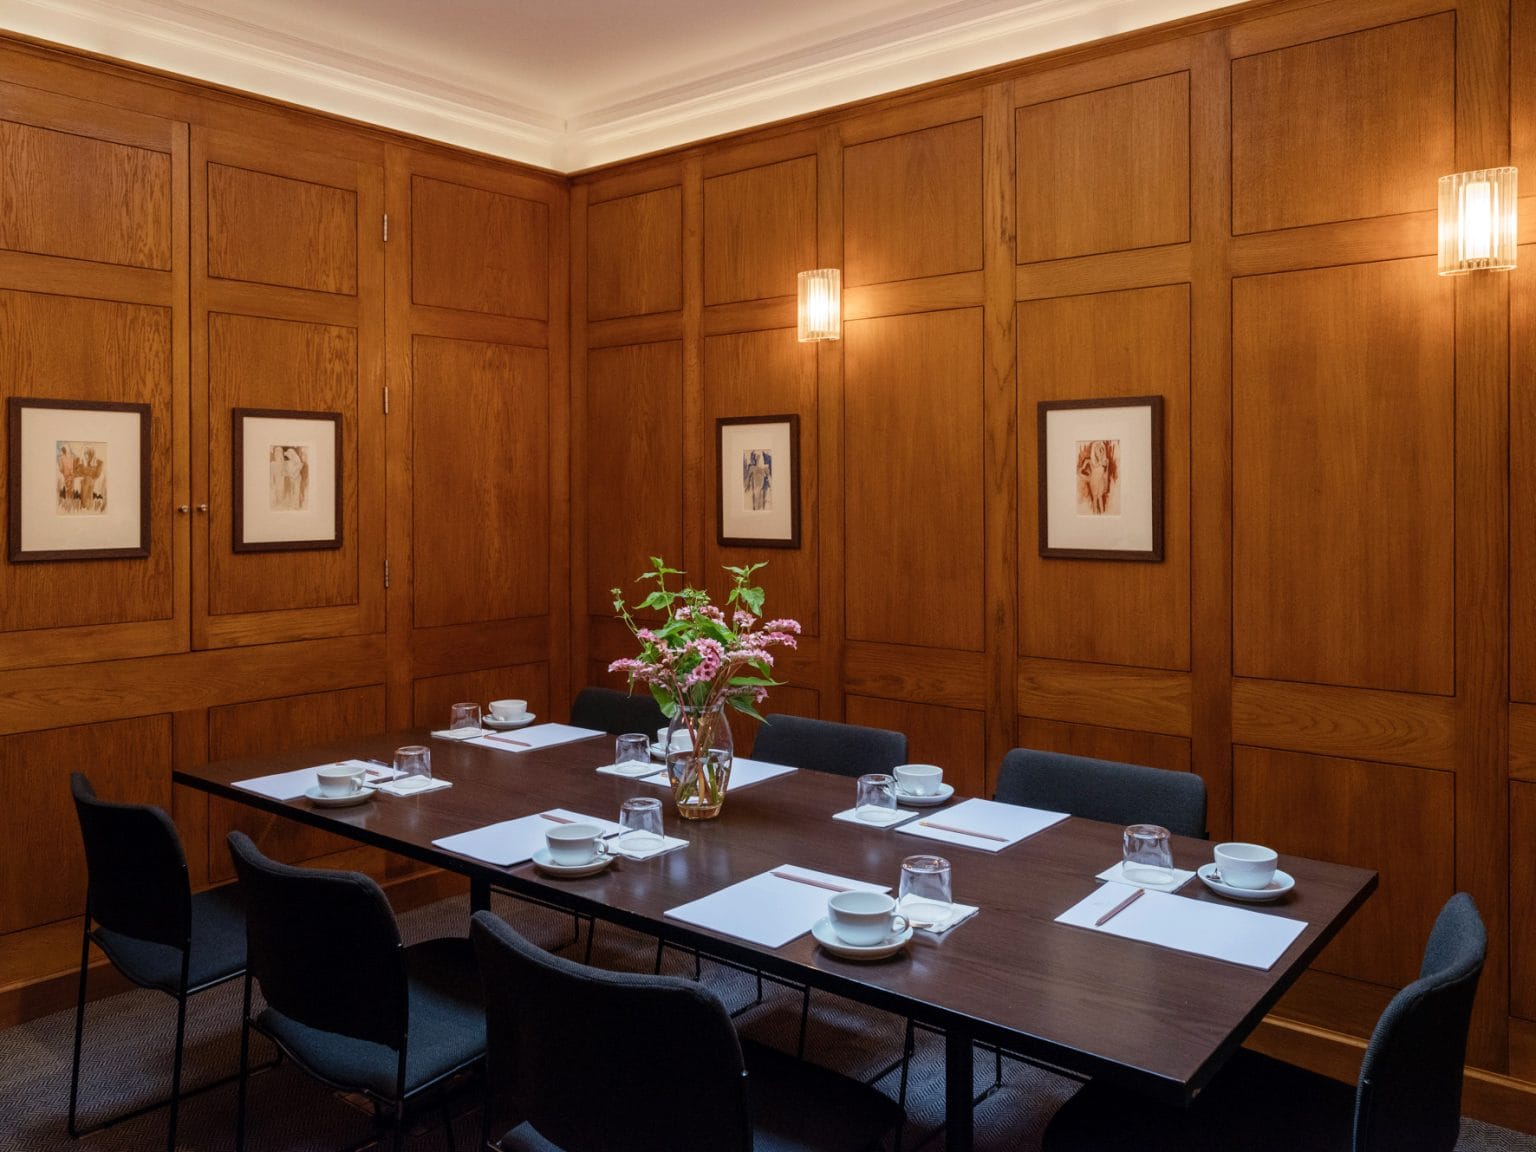 0030 - 2017 - Old Bank Hotel - Oxford - Low Res - Private Venue Conference Room - Web Hero